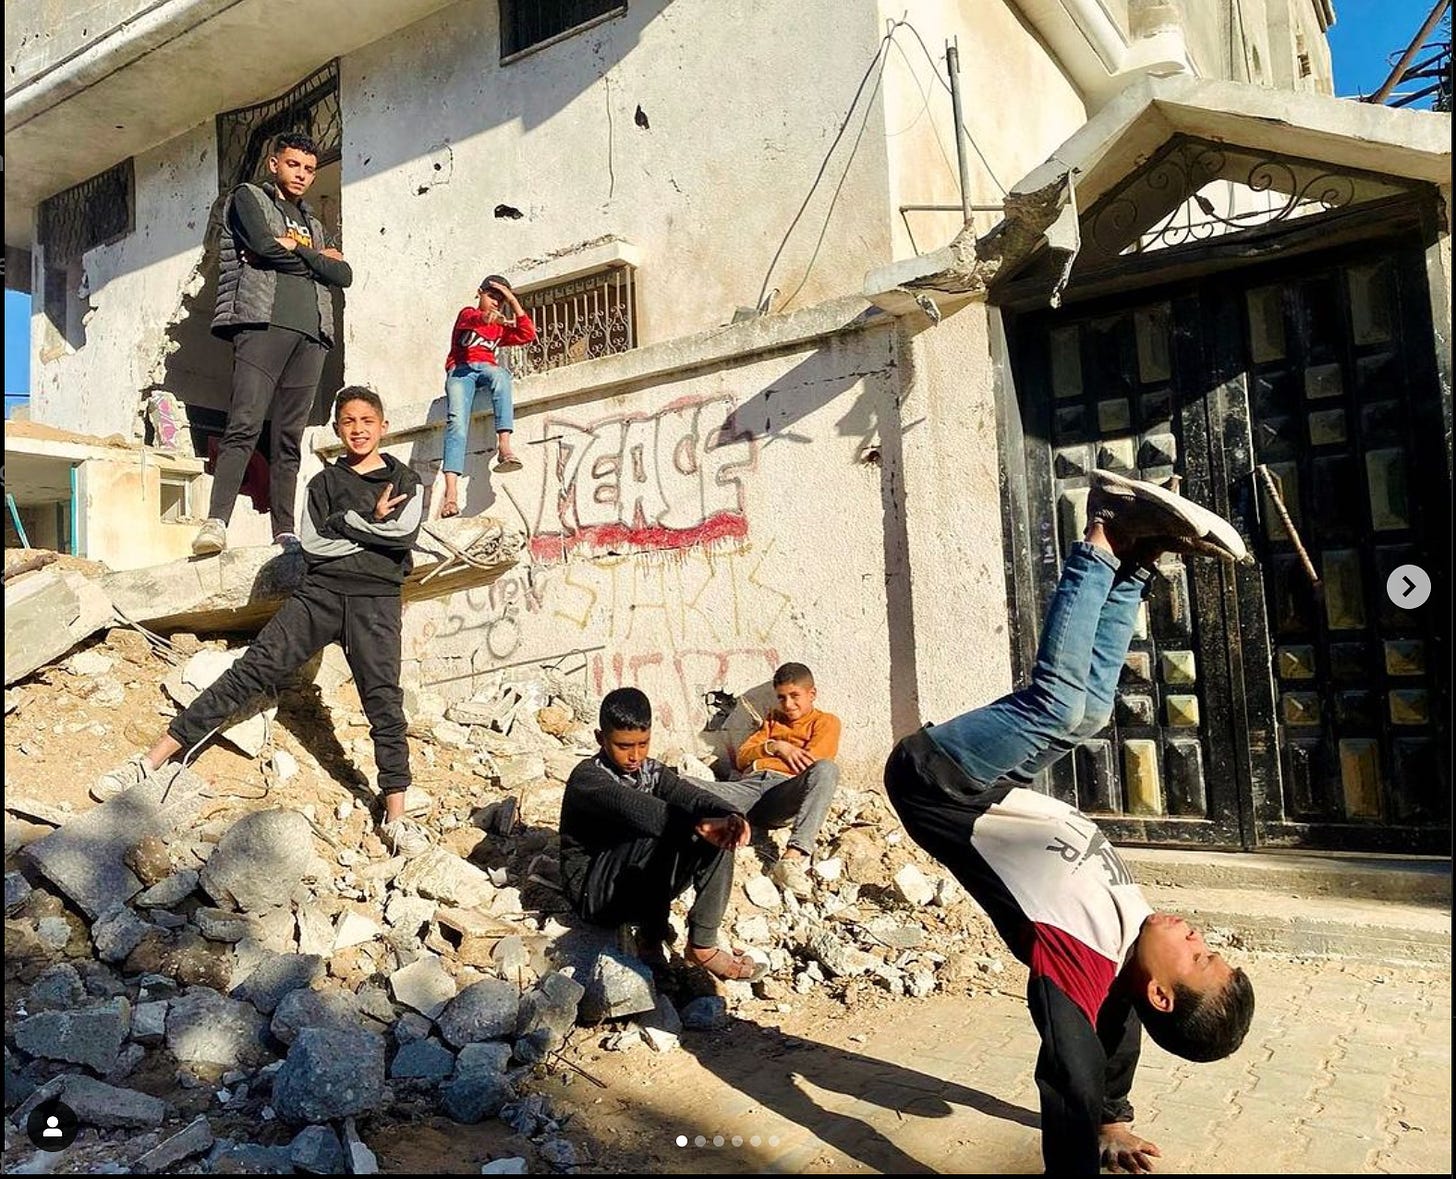 Young children pose and breakdance on and around rubble that's piled alongside a building with "peace" graffiti spray-painted on its walls.